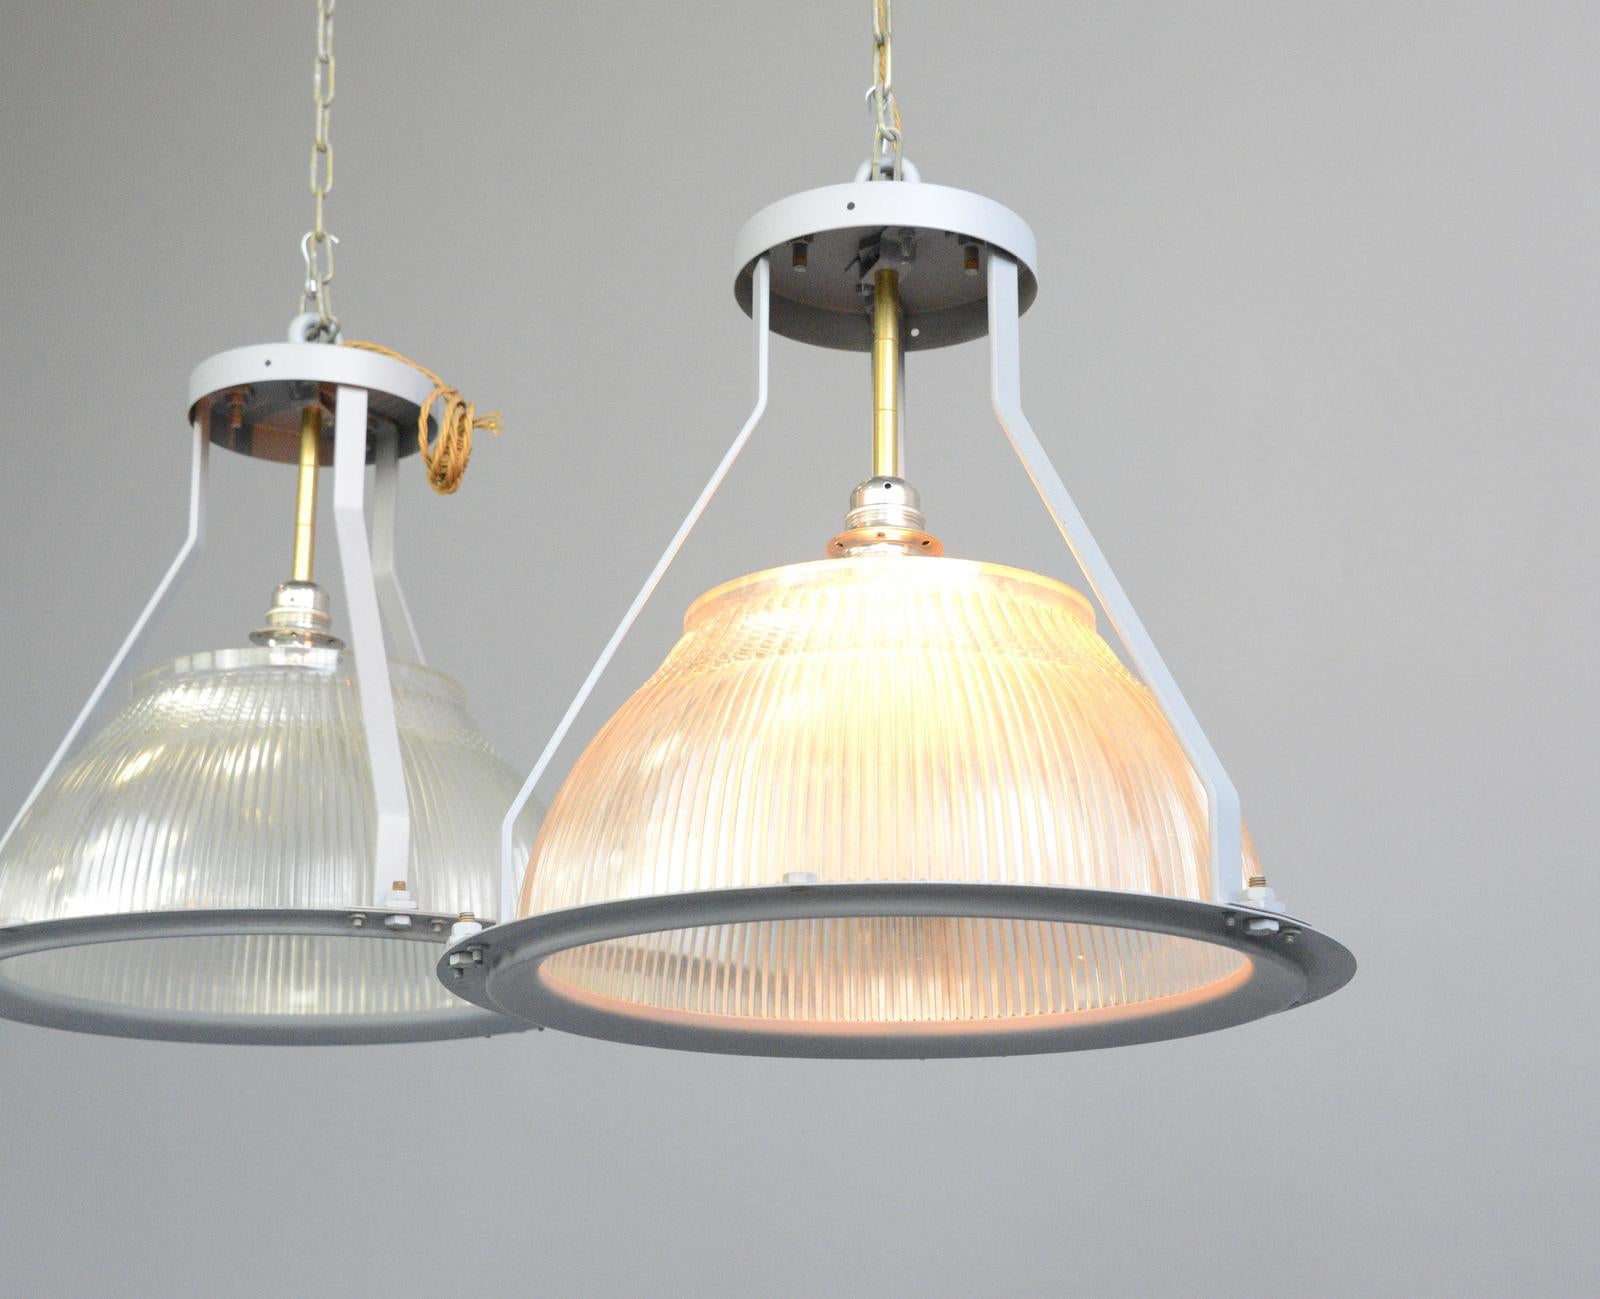 Large aircraft hanger lights by Holophane, circa 1940s

- Price is per light
- Heavy prismatic glass diffusers
- Comes with 100cm of gold twist cable
- Comes with 100cm of steel suspension chain and ceiling hooks
- Takes E27 fitting bulbs
-